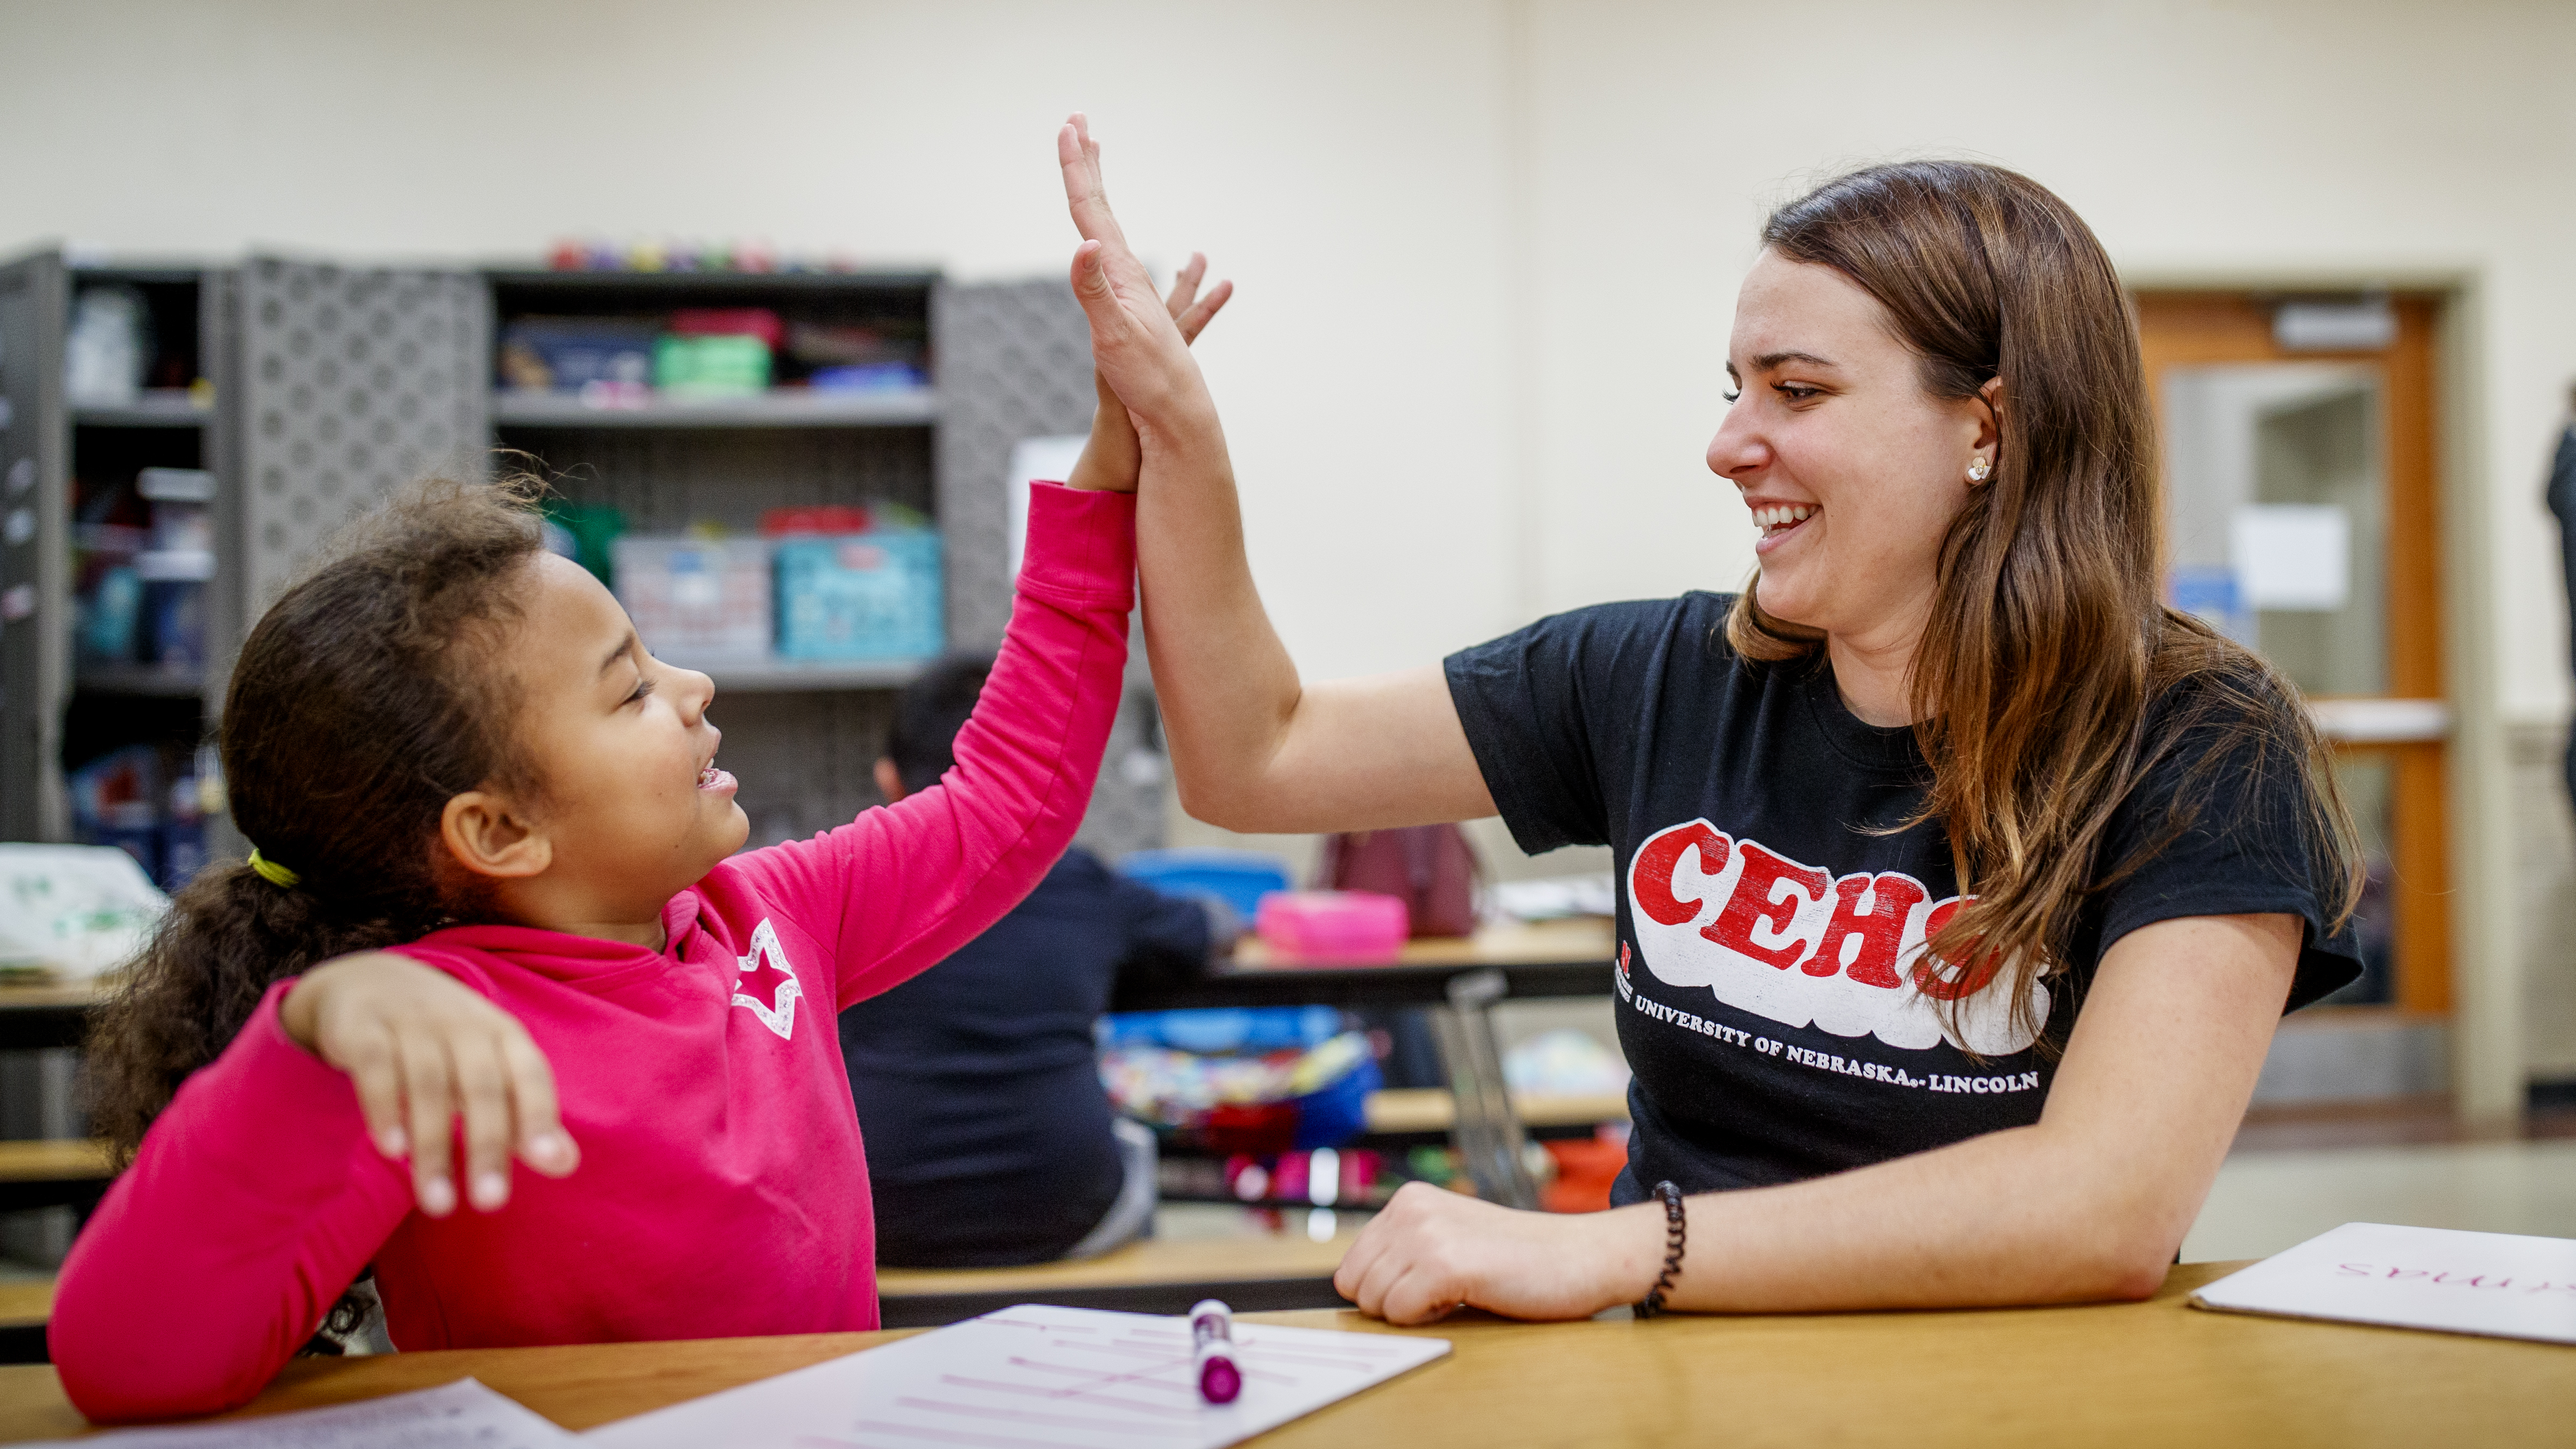 CEHS student high fives elementary aged child during America Reads program